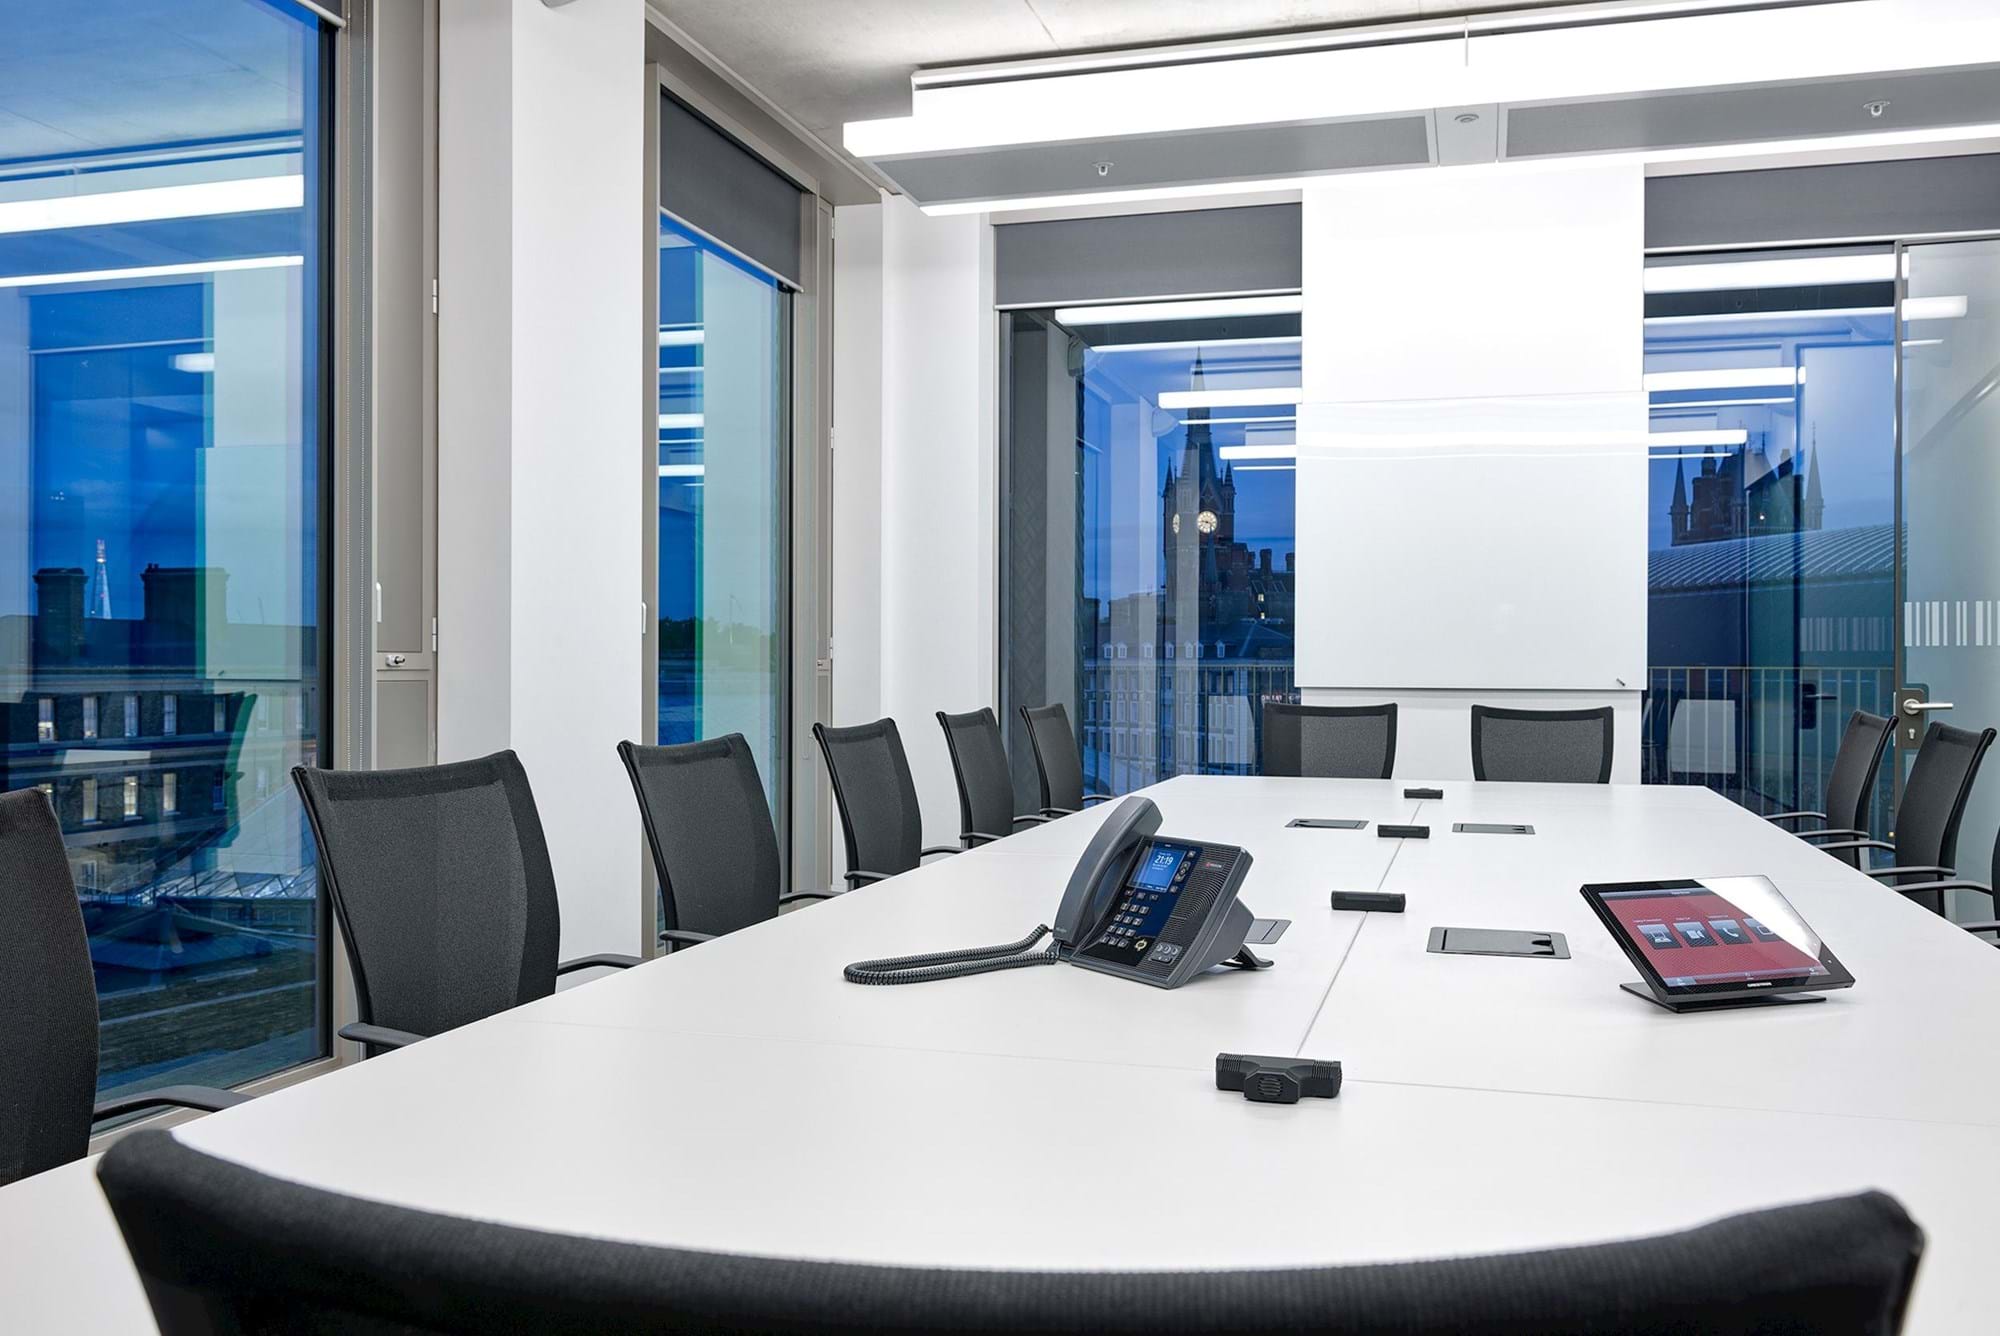 Modus Workspace office design, fit out and refurbishment - IT Company - Meeting Room - CSG London 08 highres sRGB.jpg